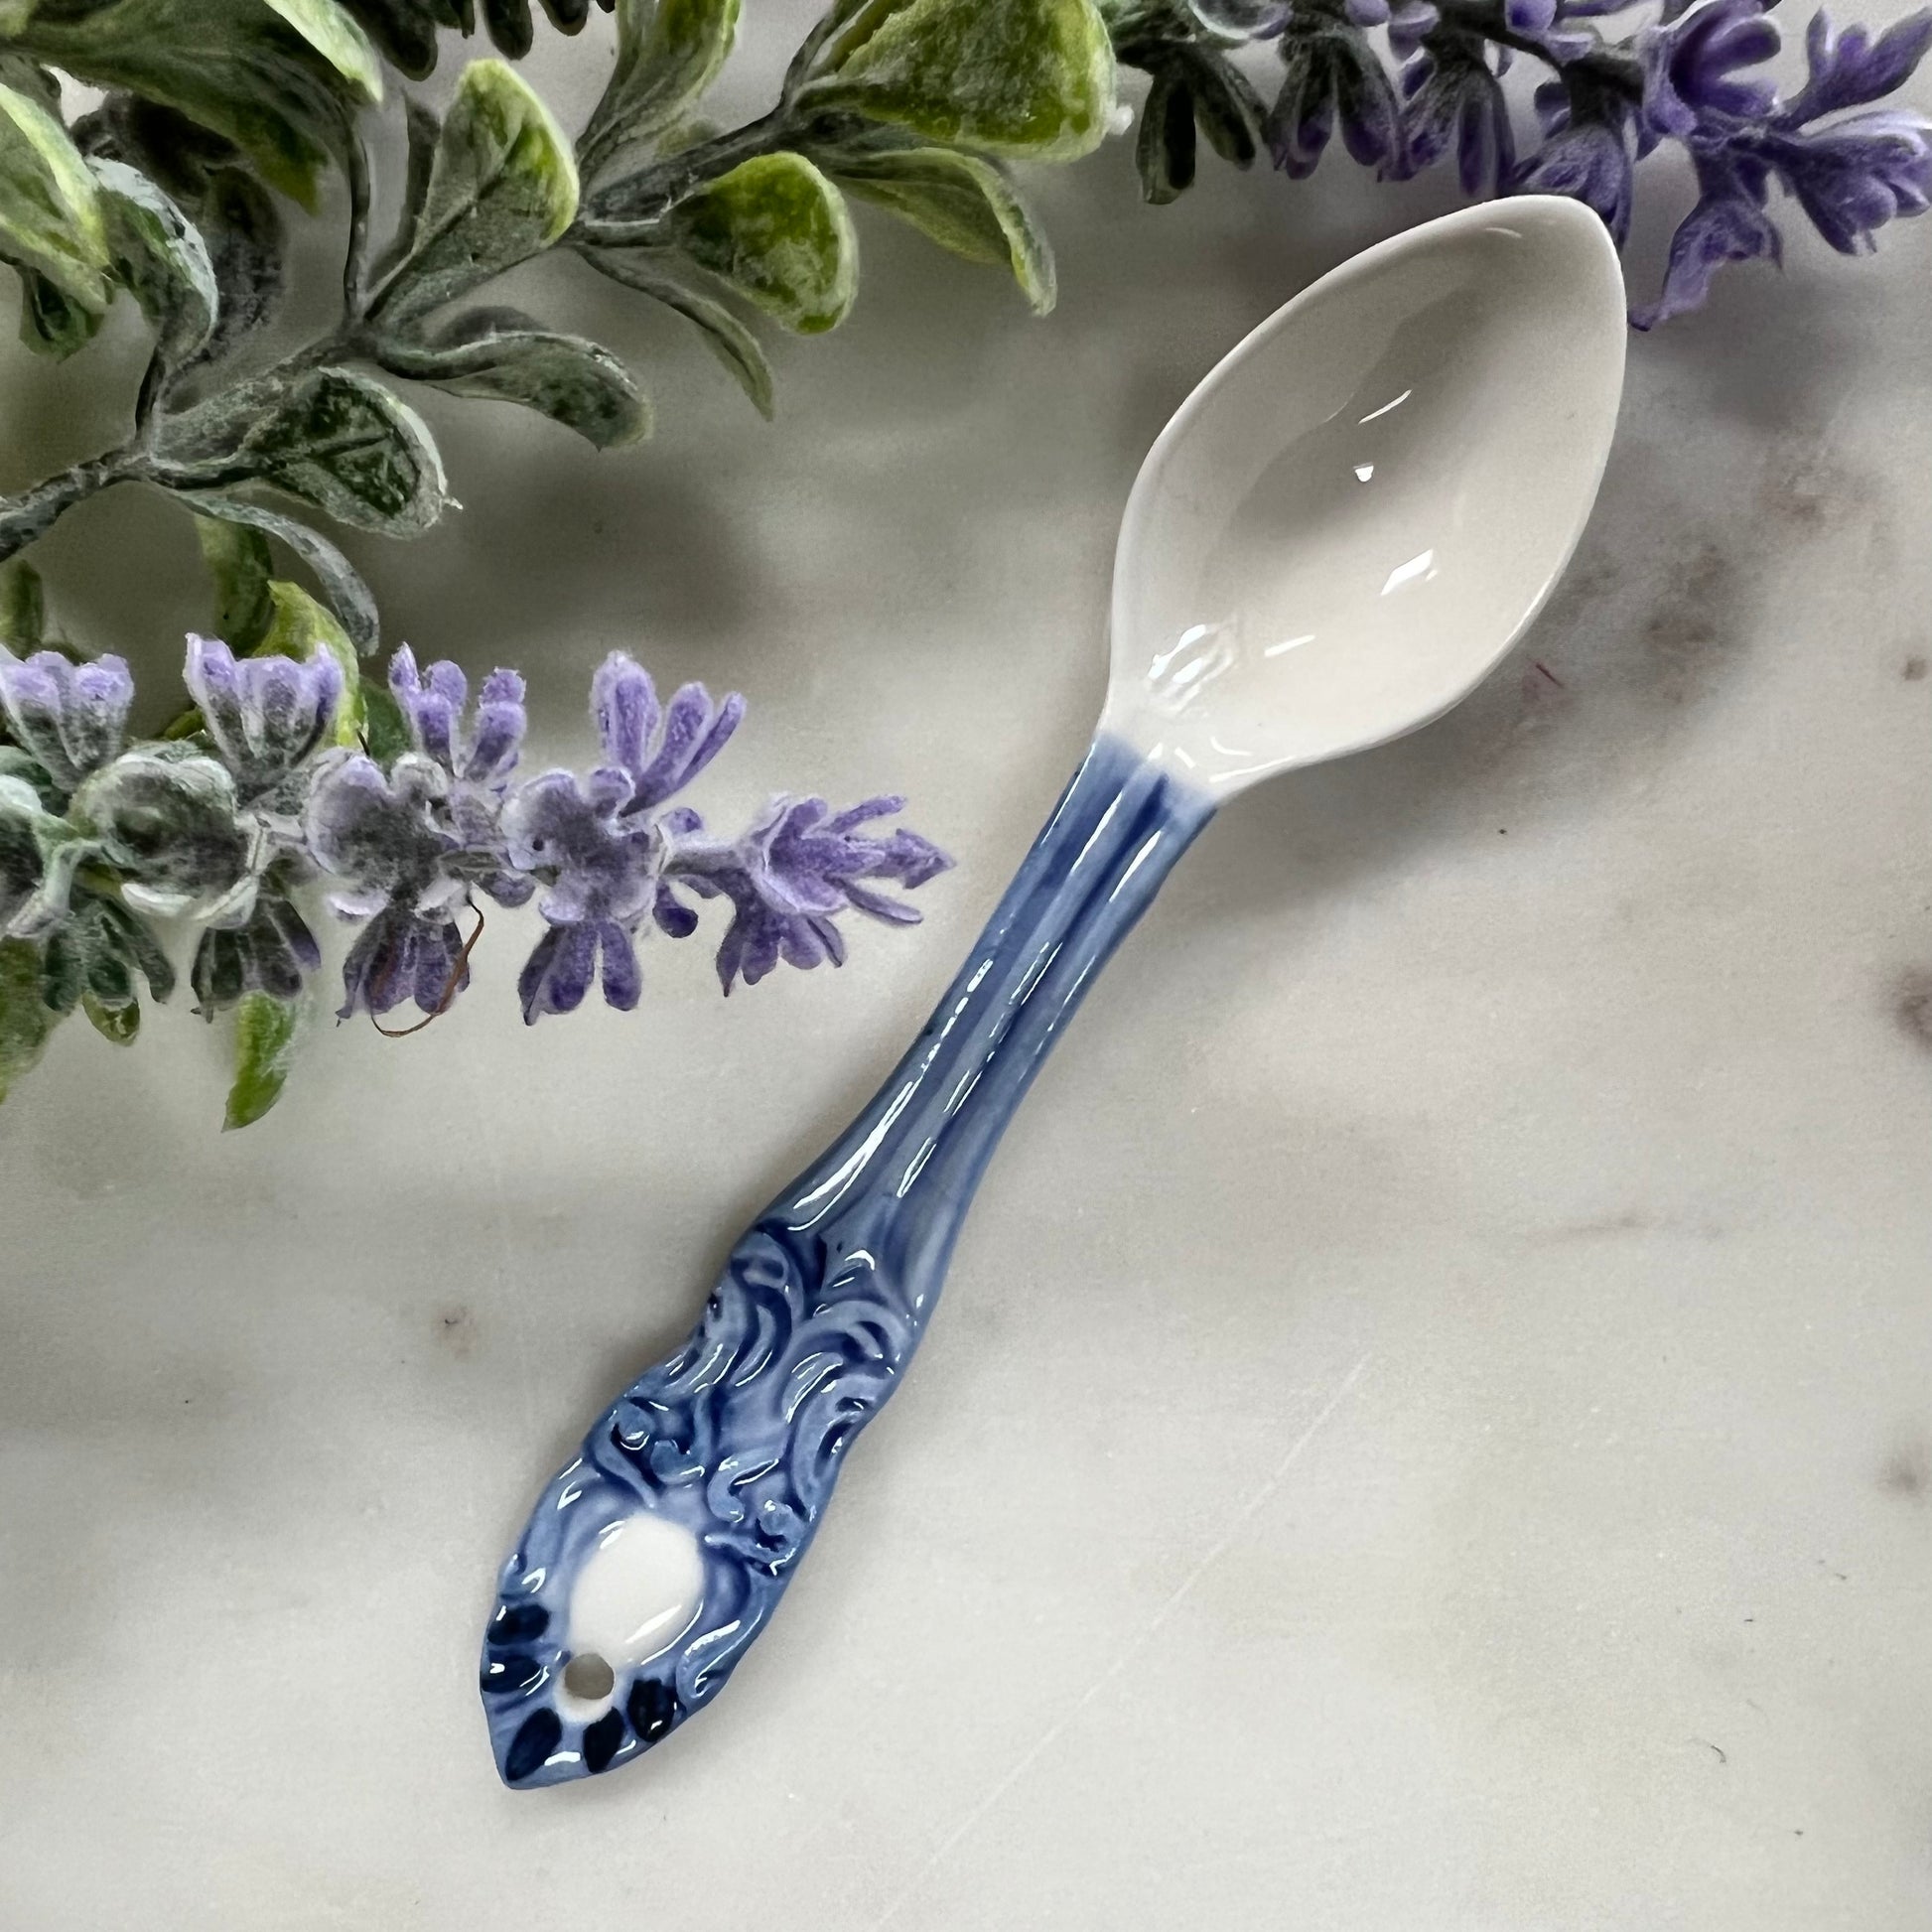 blue and white spoon with ornate pattern on handle.